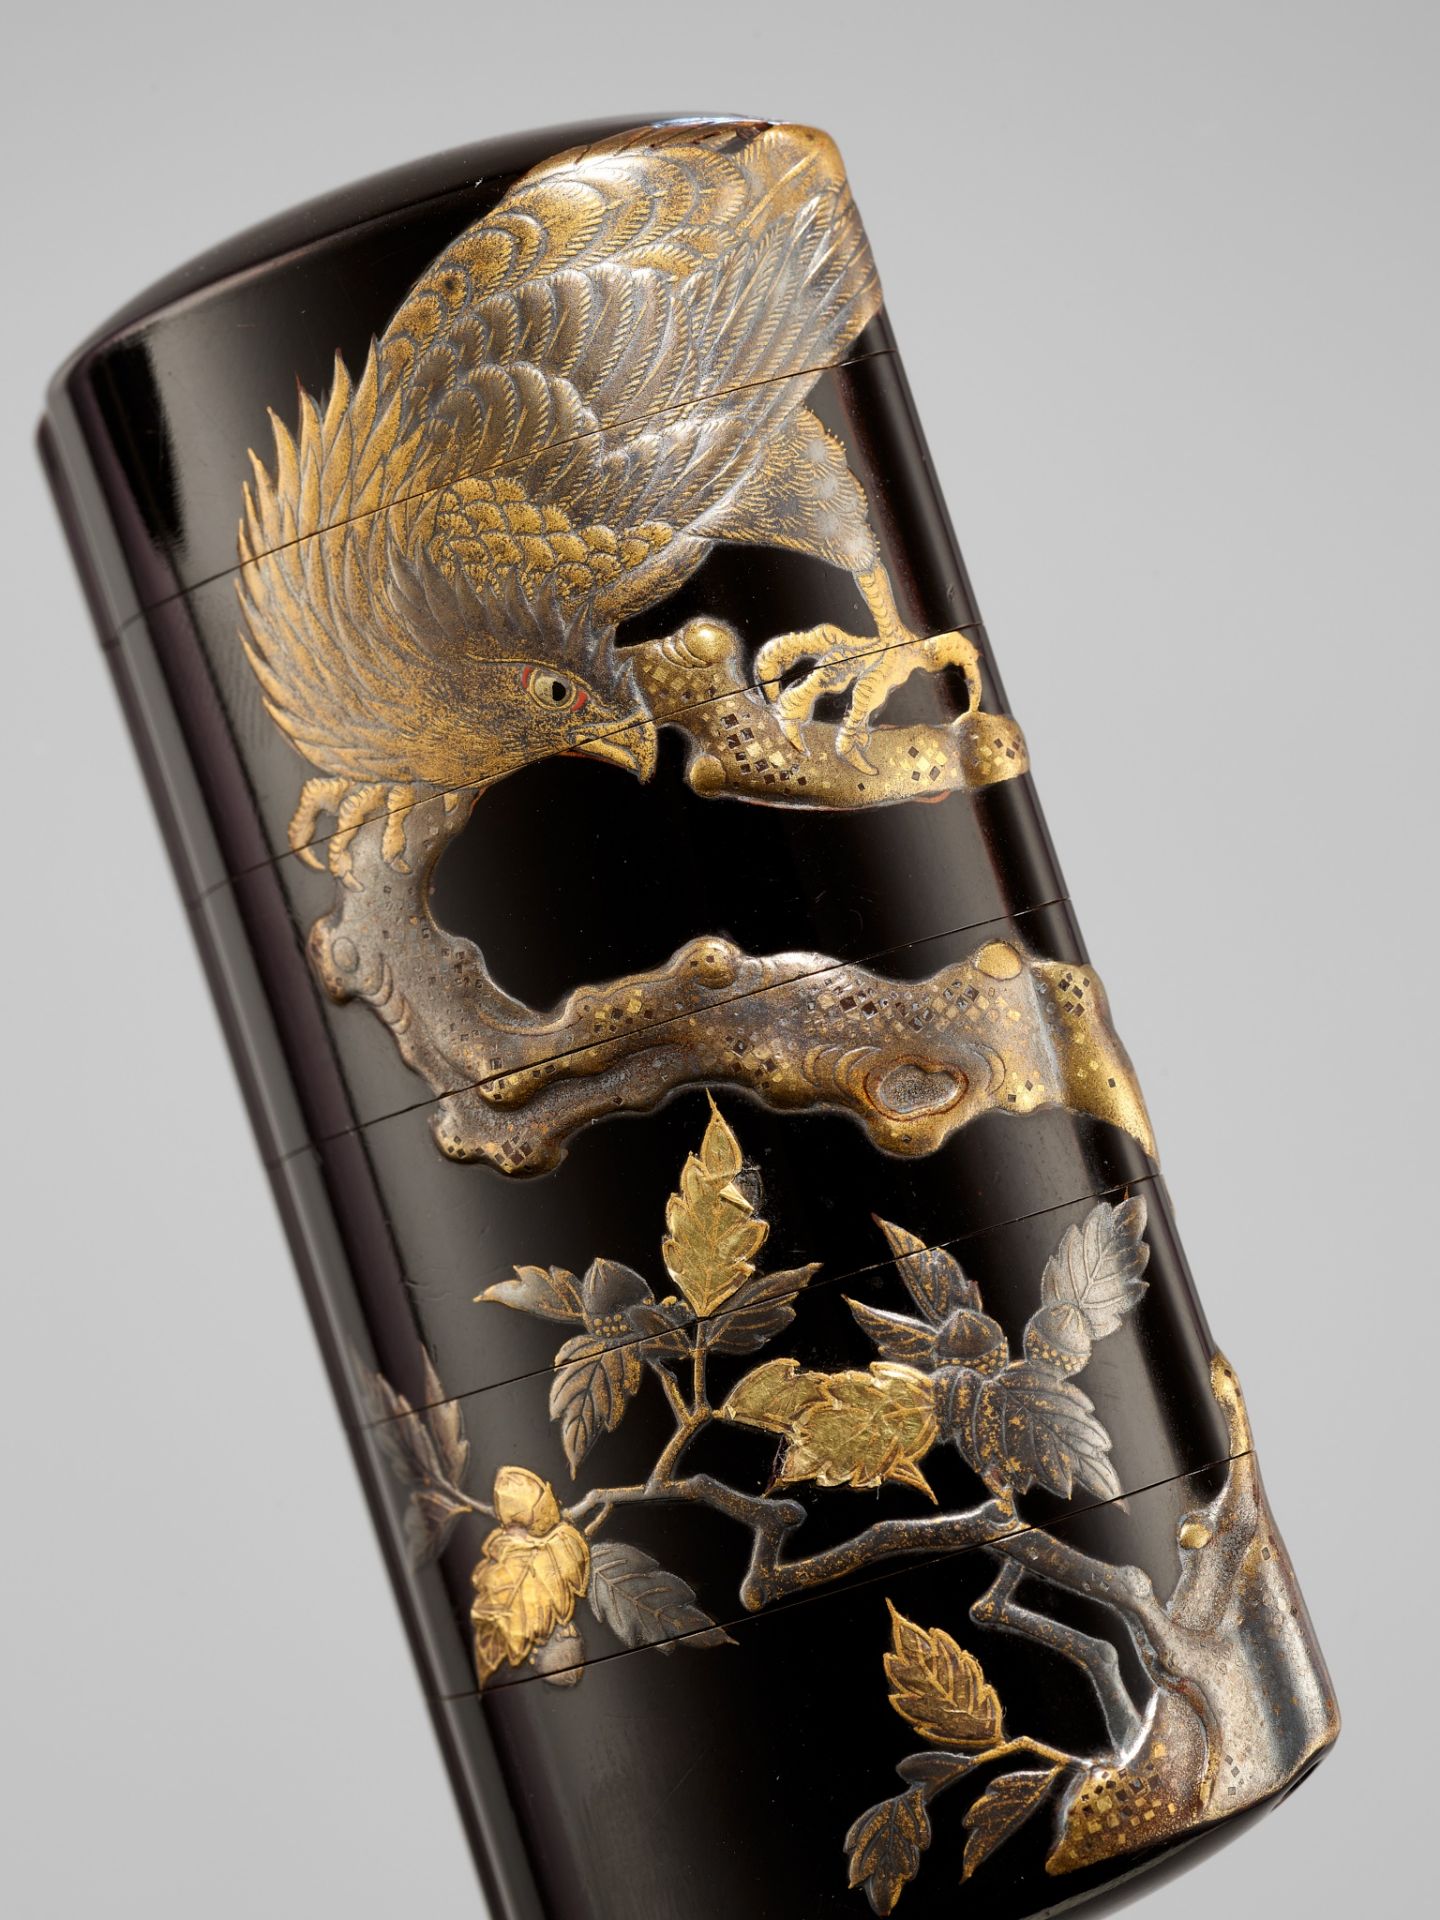 A FINE FIVE-CASE LACQUER INRO DEPICTING AN EAGLE AND MONKEY